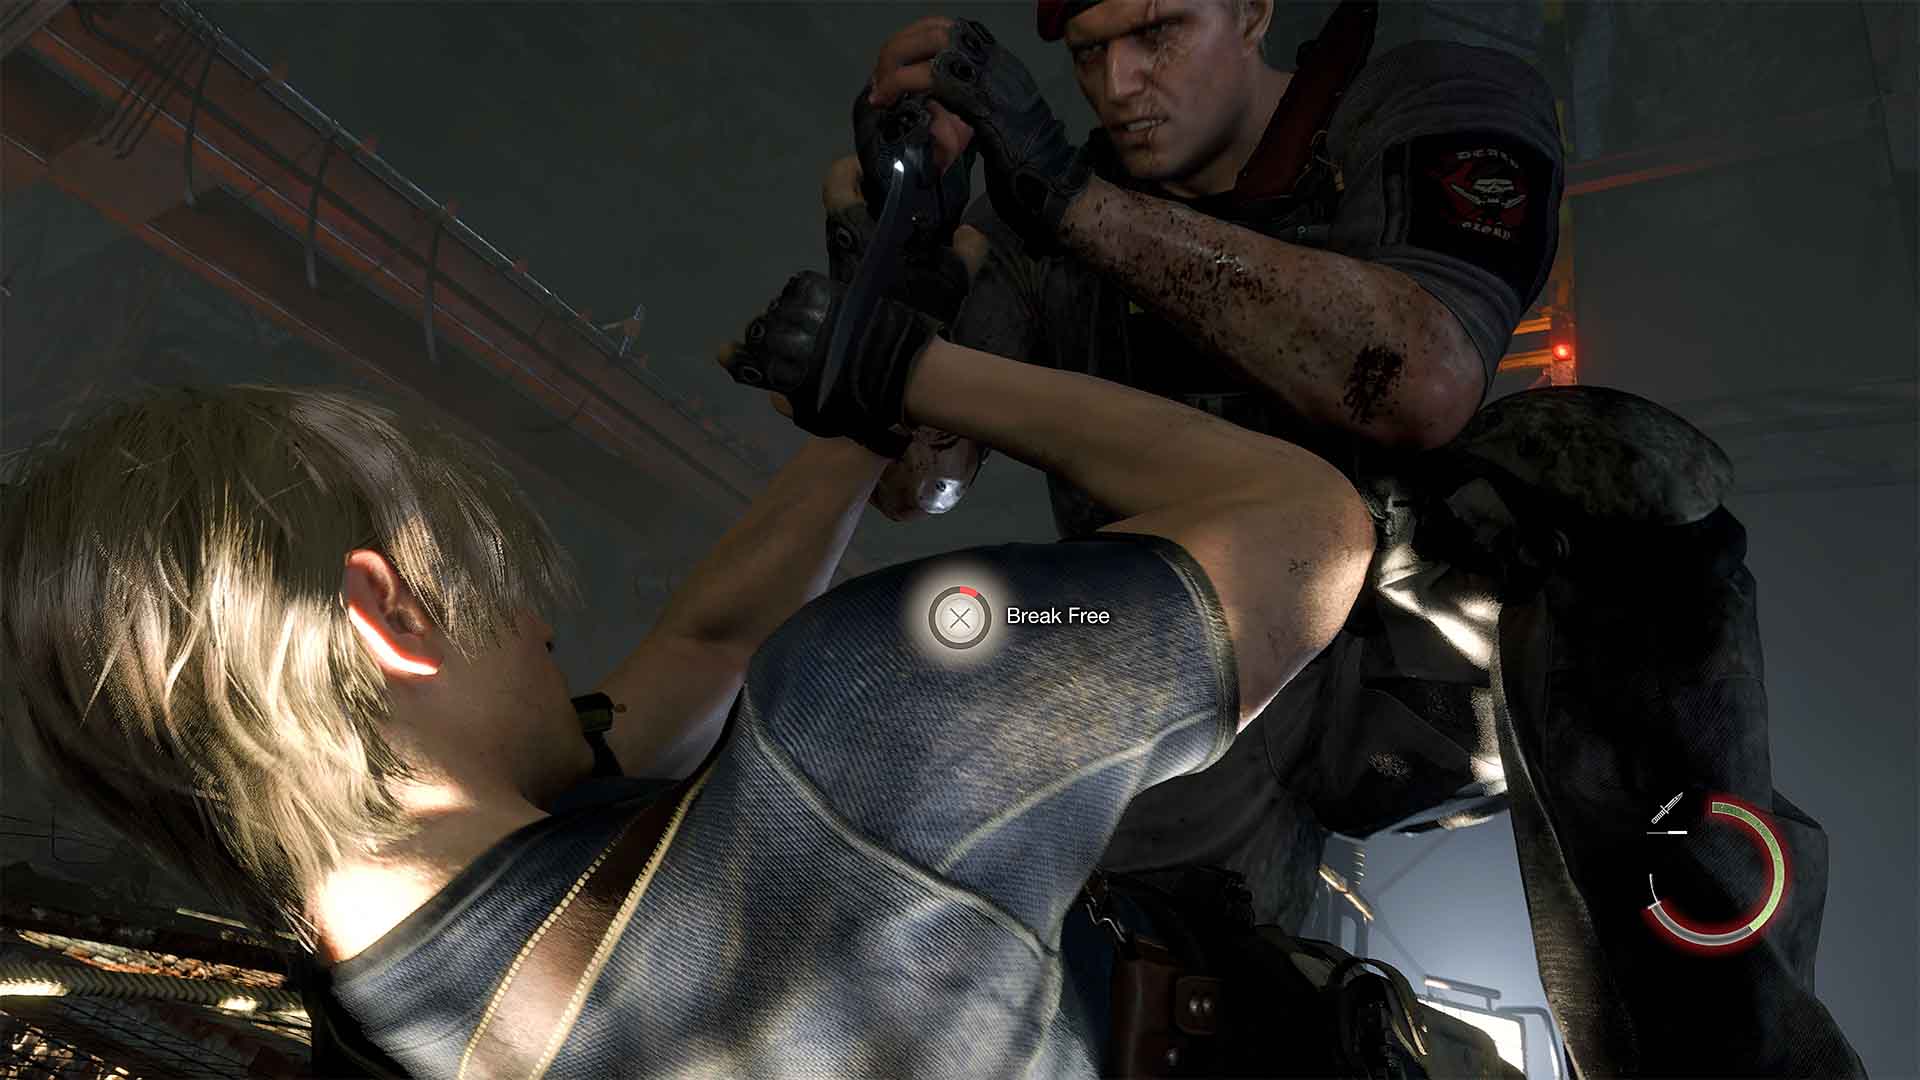 A Resident Evil 4 demo is coming, new trailer shows off Krauser fight